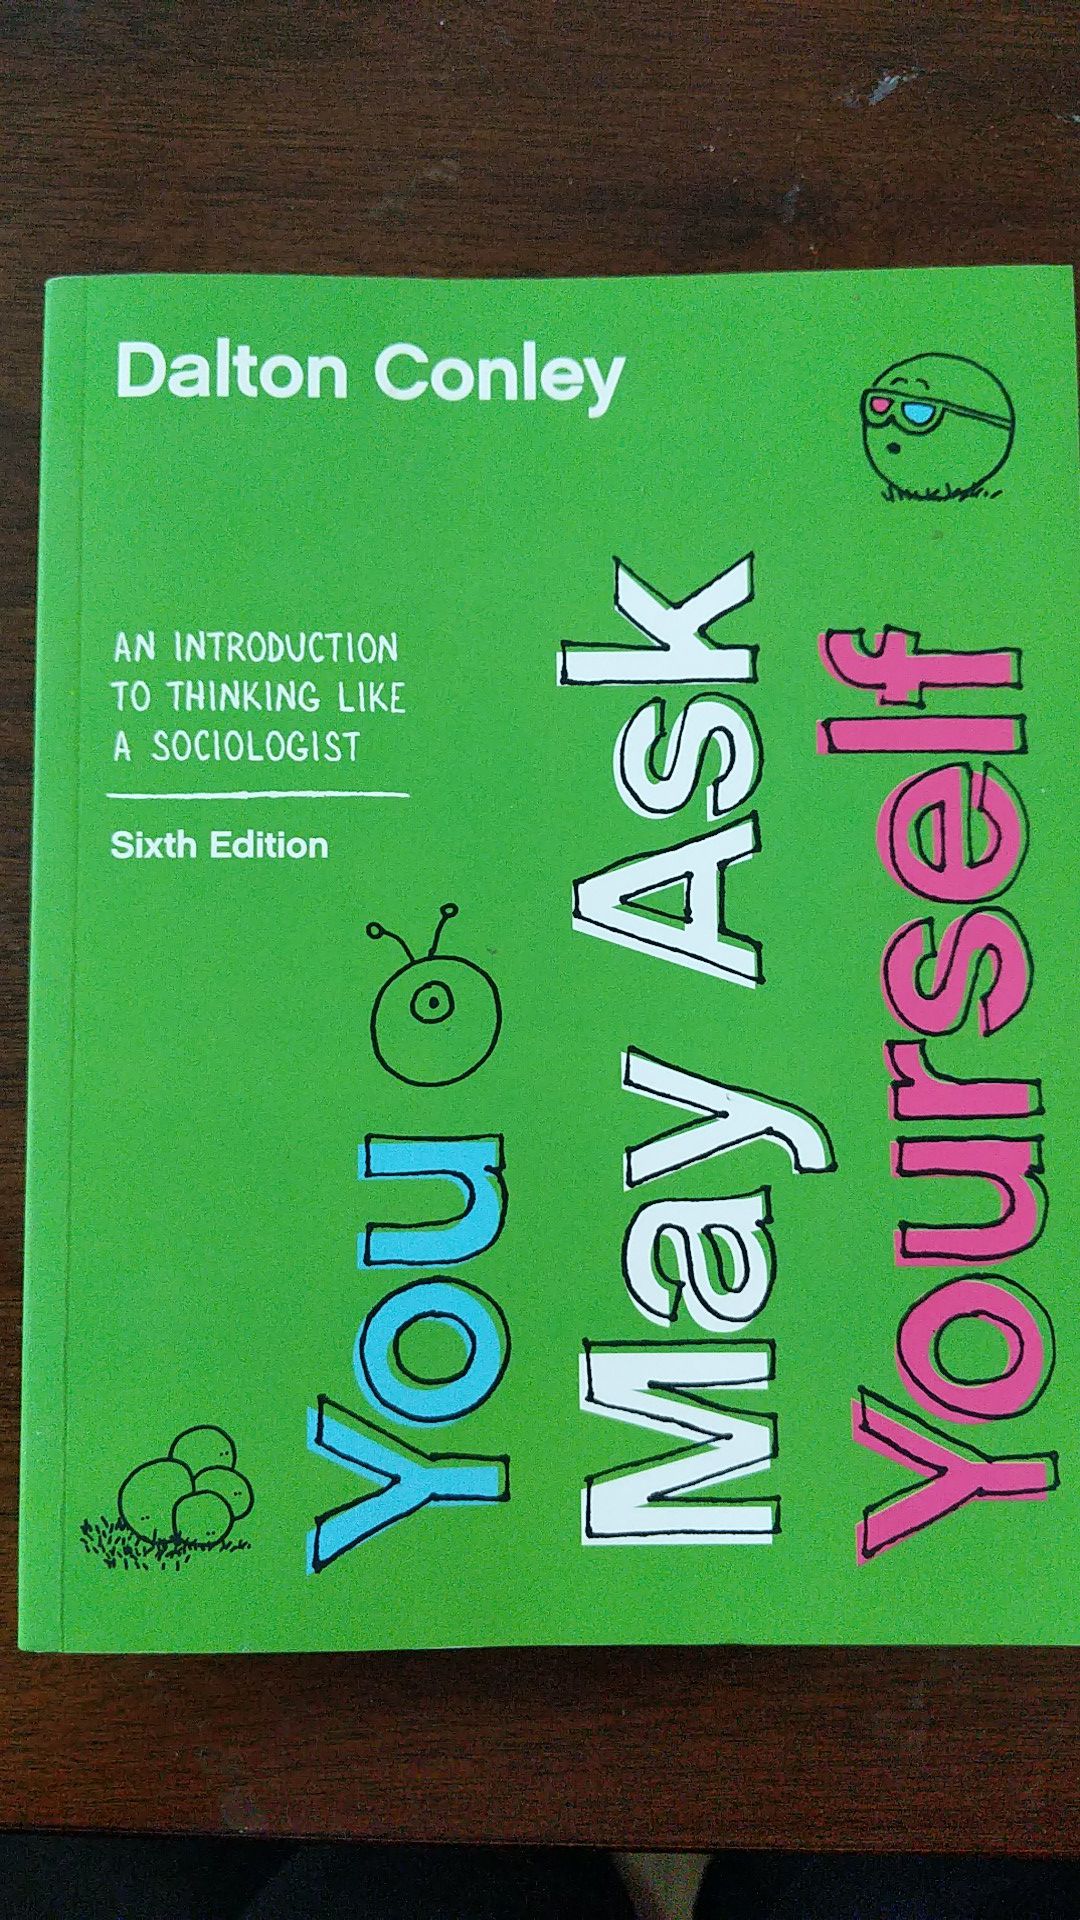 You may ask yourself an introduction to thinking like a sociologist 6th edition